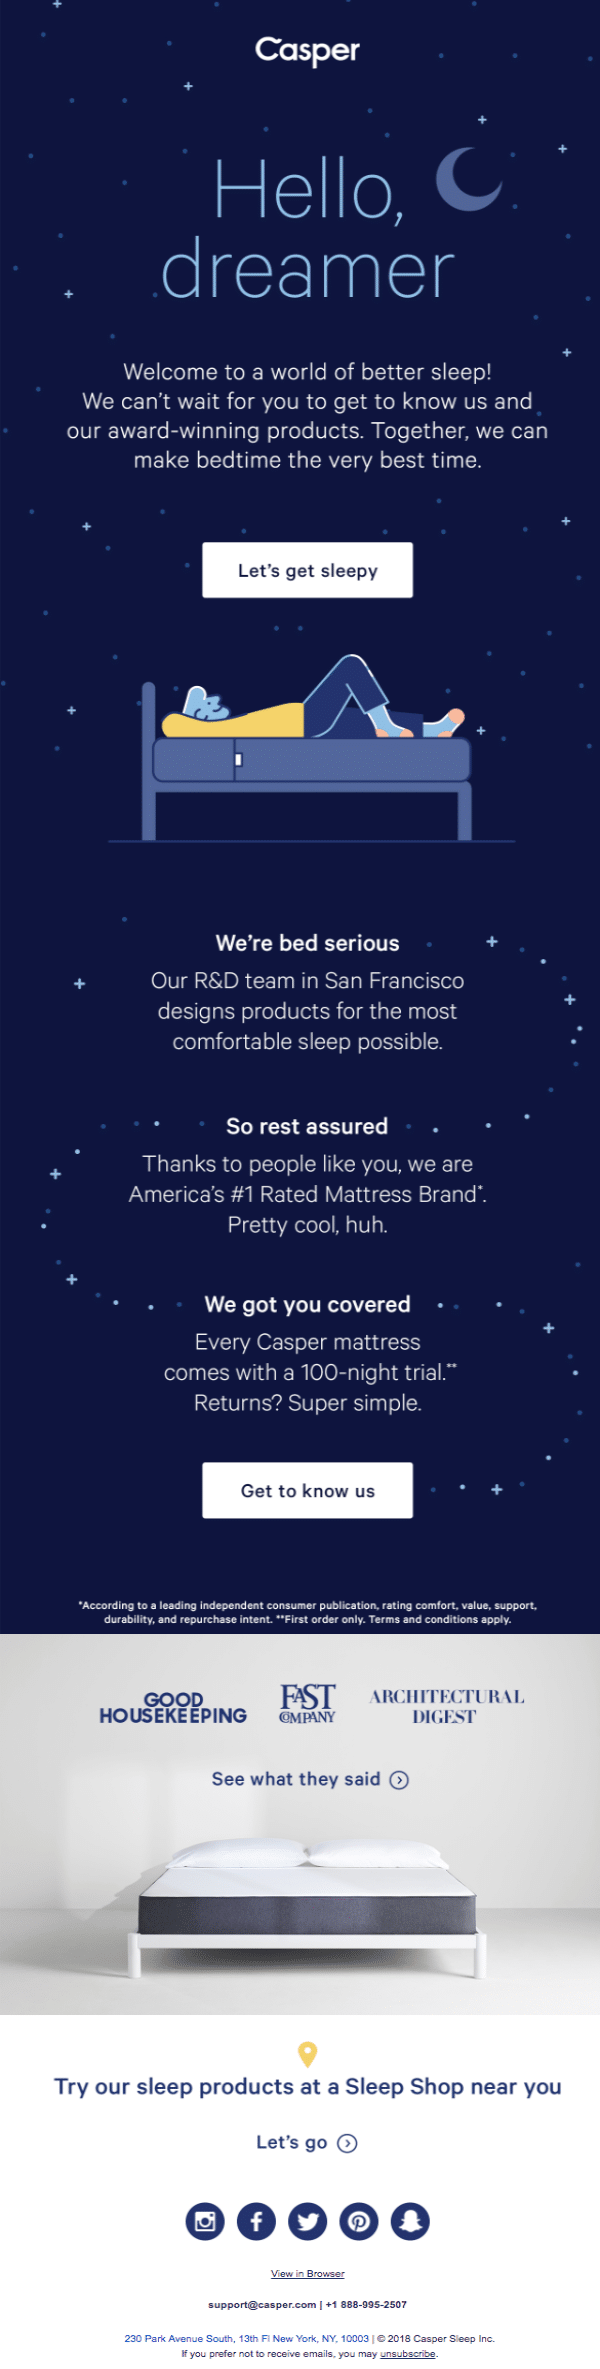 Online mattress company Casper greets customers with an introduction to their product.